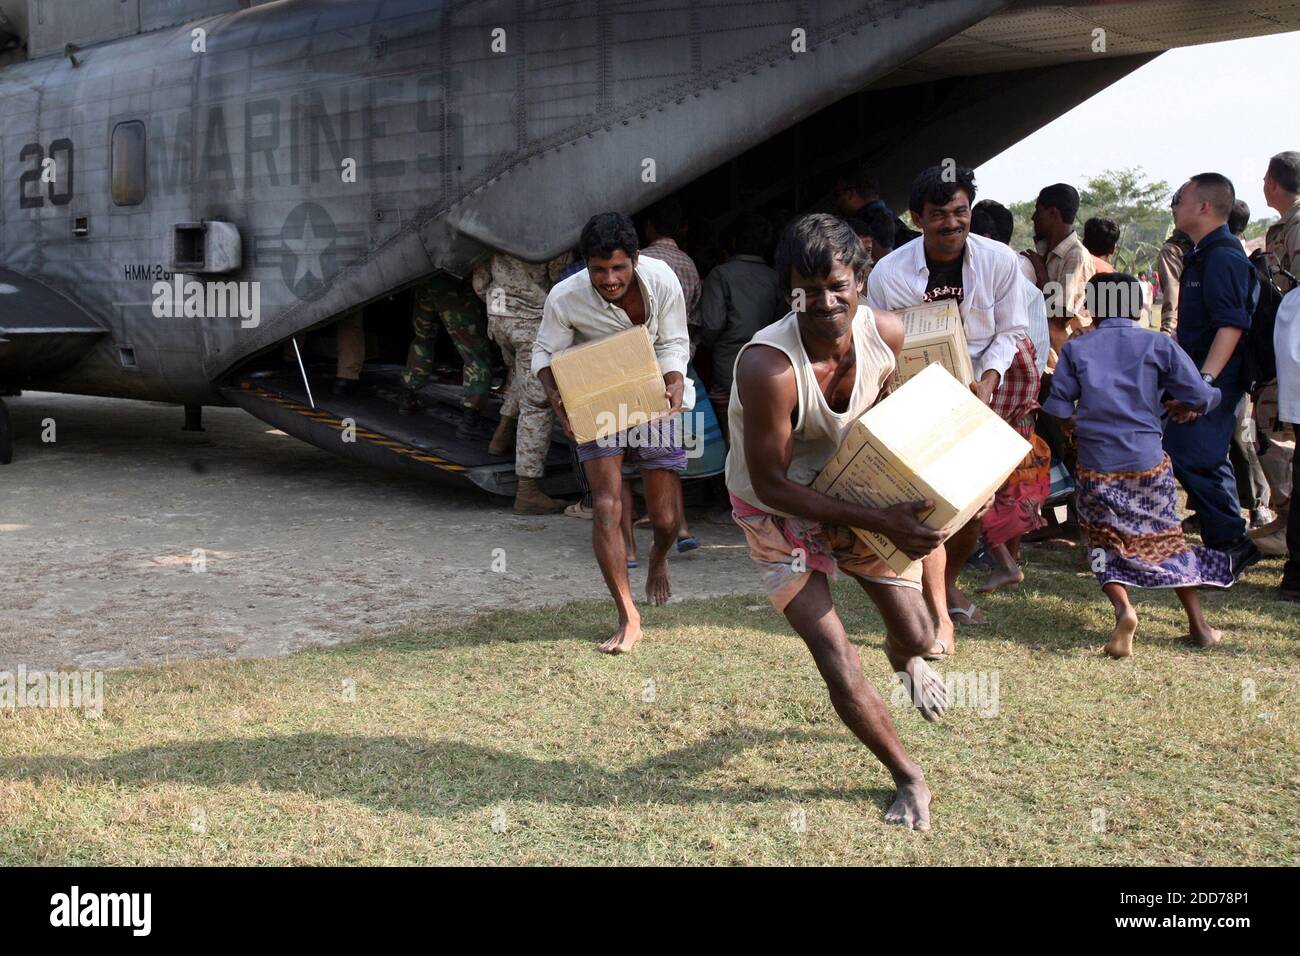 NO FILM, NO VIDEO, NO TV, NO DOCUMENTARY - Bangladeshi locals off-load food and supplies CH-53E Super Stallion from the 22nd Marine Expeditionary Unit Special Operations Capable, embarked aboard the amphibious assault ship USS Kearsarge in Rangabali, Bangladesh on December 1, 2007. Photo by Peter R. Miller/US Marine Corps/MCT/ABACAPRESS.COM Stock Photo